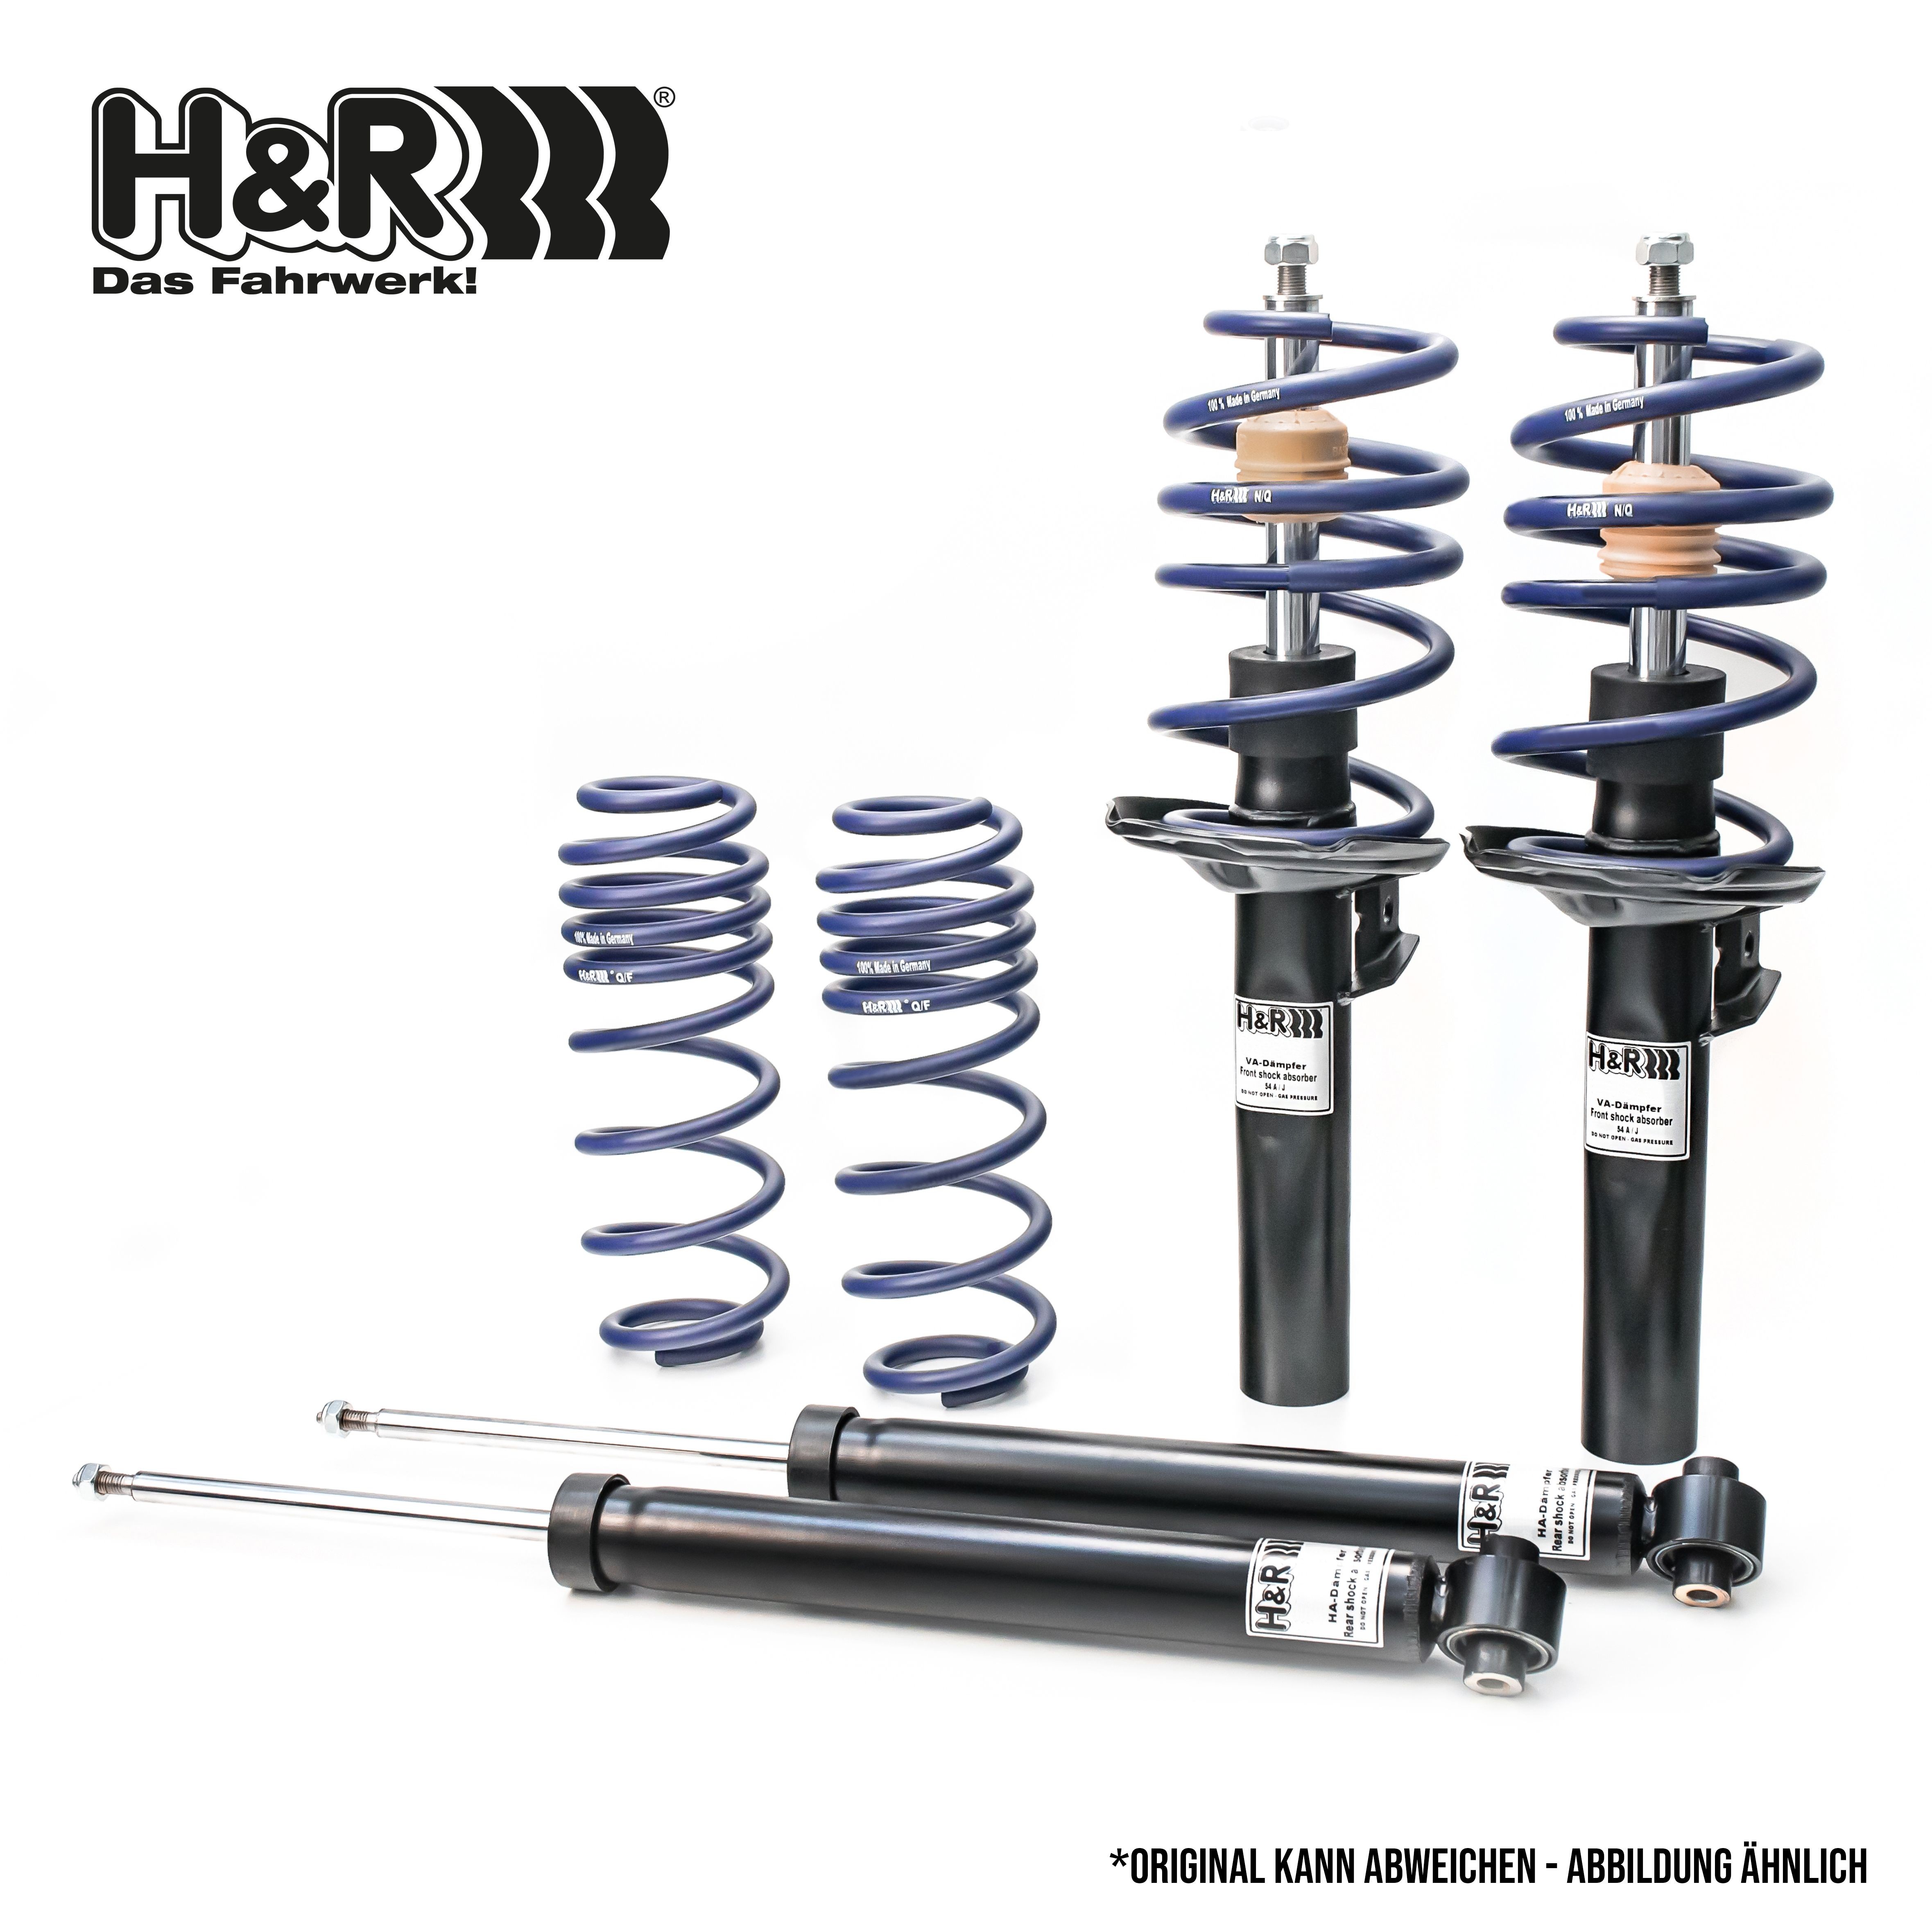 Volkswagen Suspension Kit, coil springs / shock absorbers H&R 31051-1 at a good price